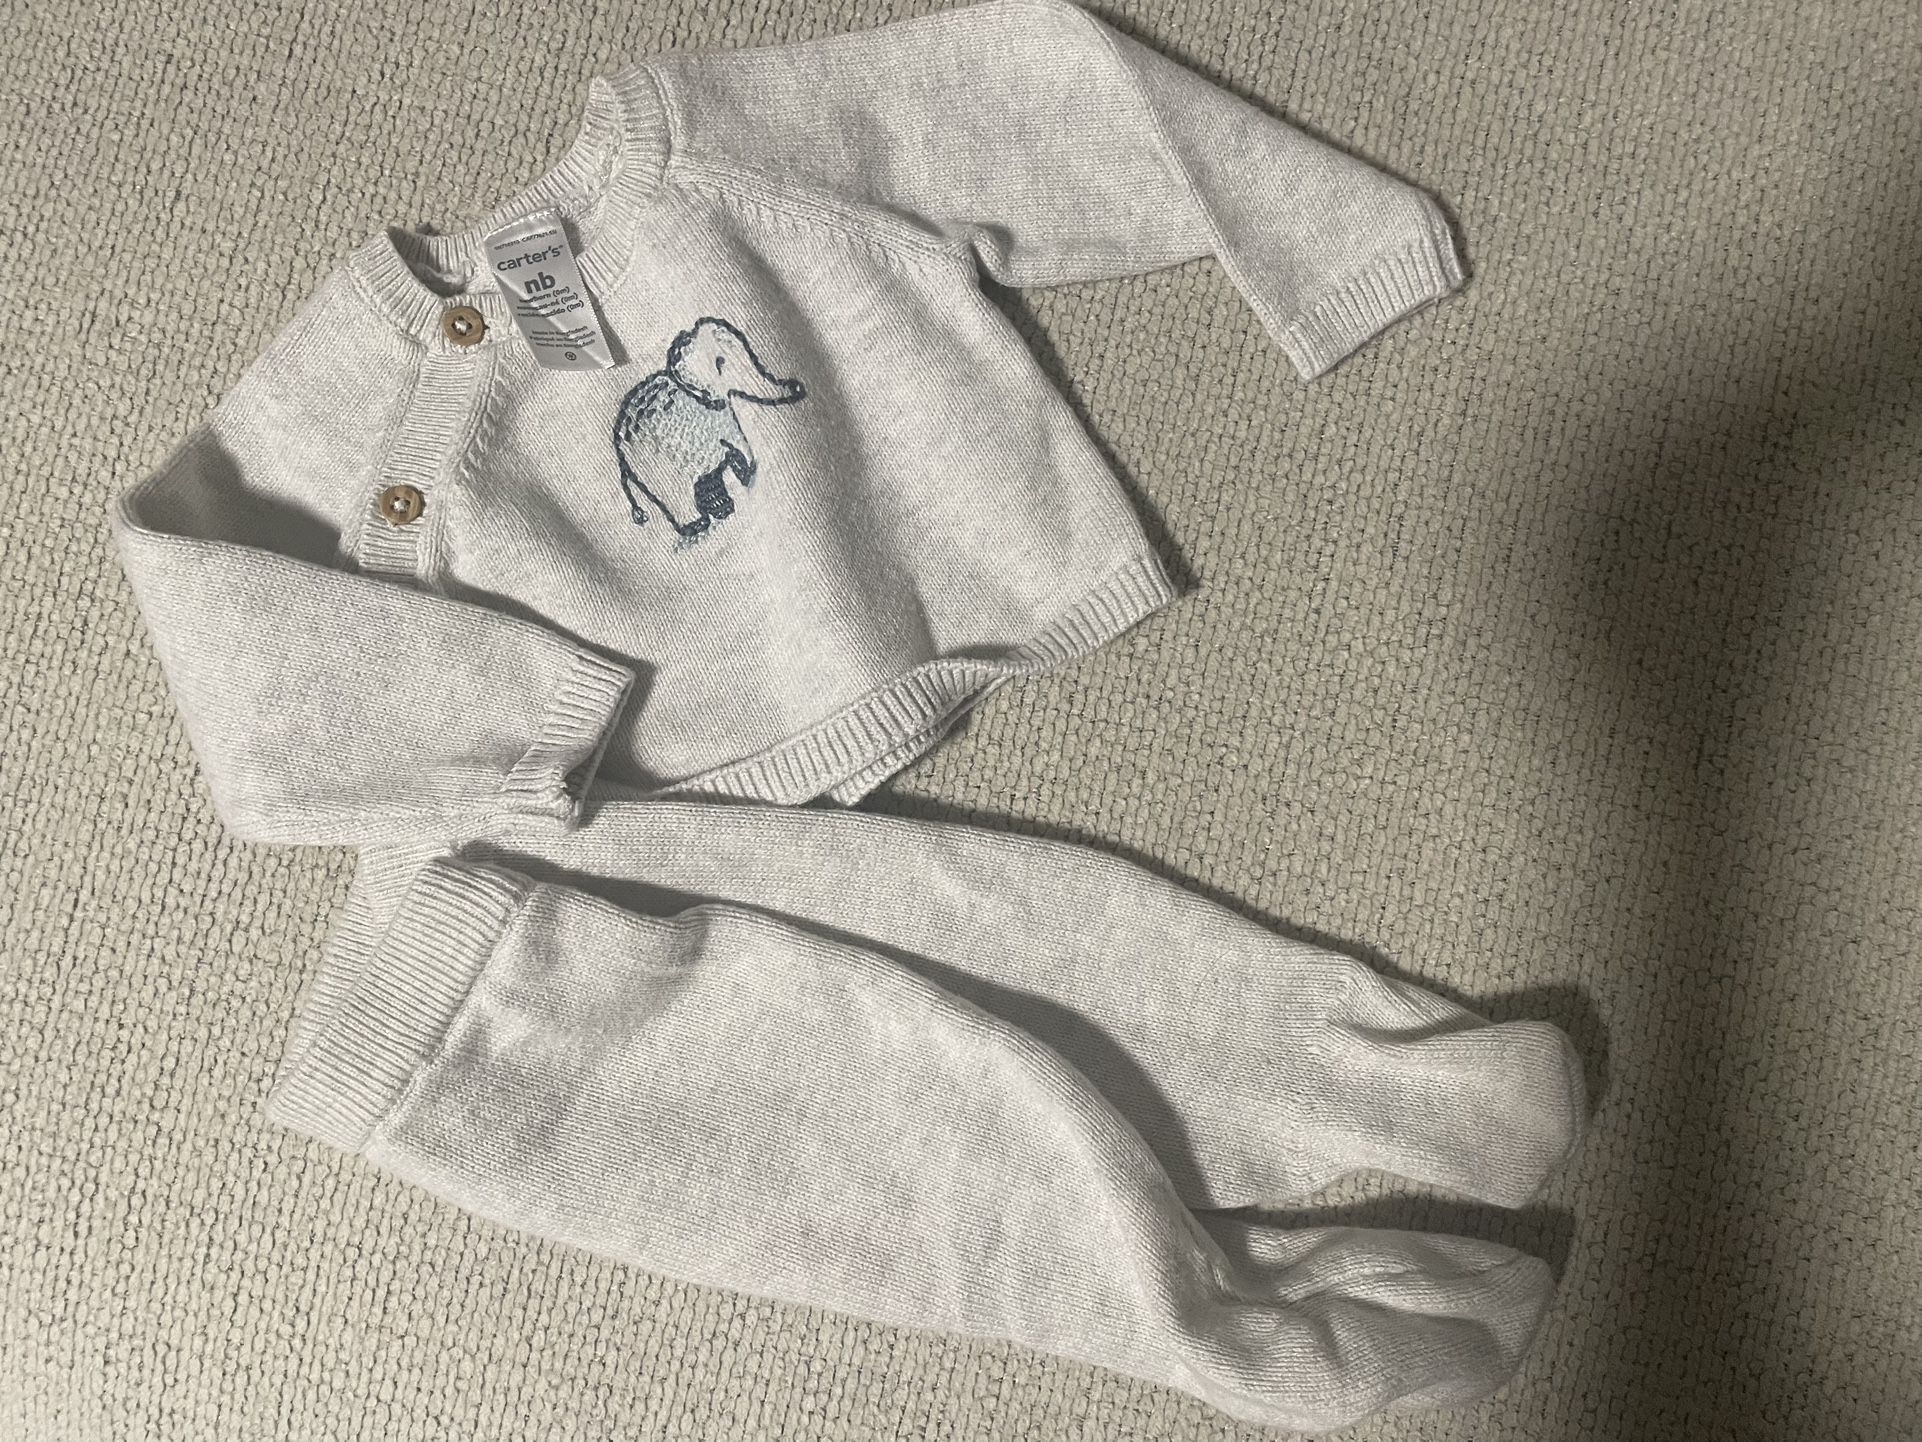 Baby Outfits